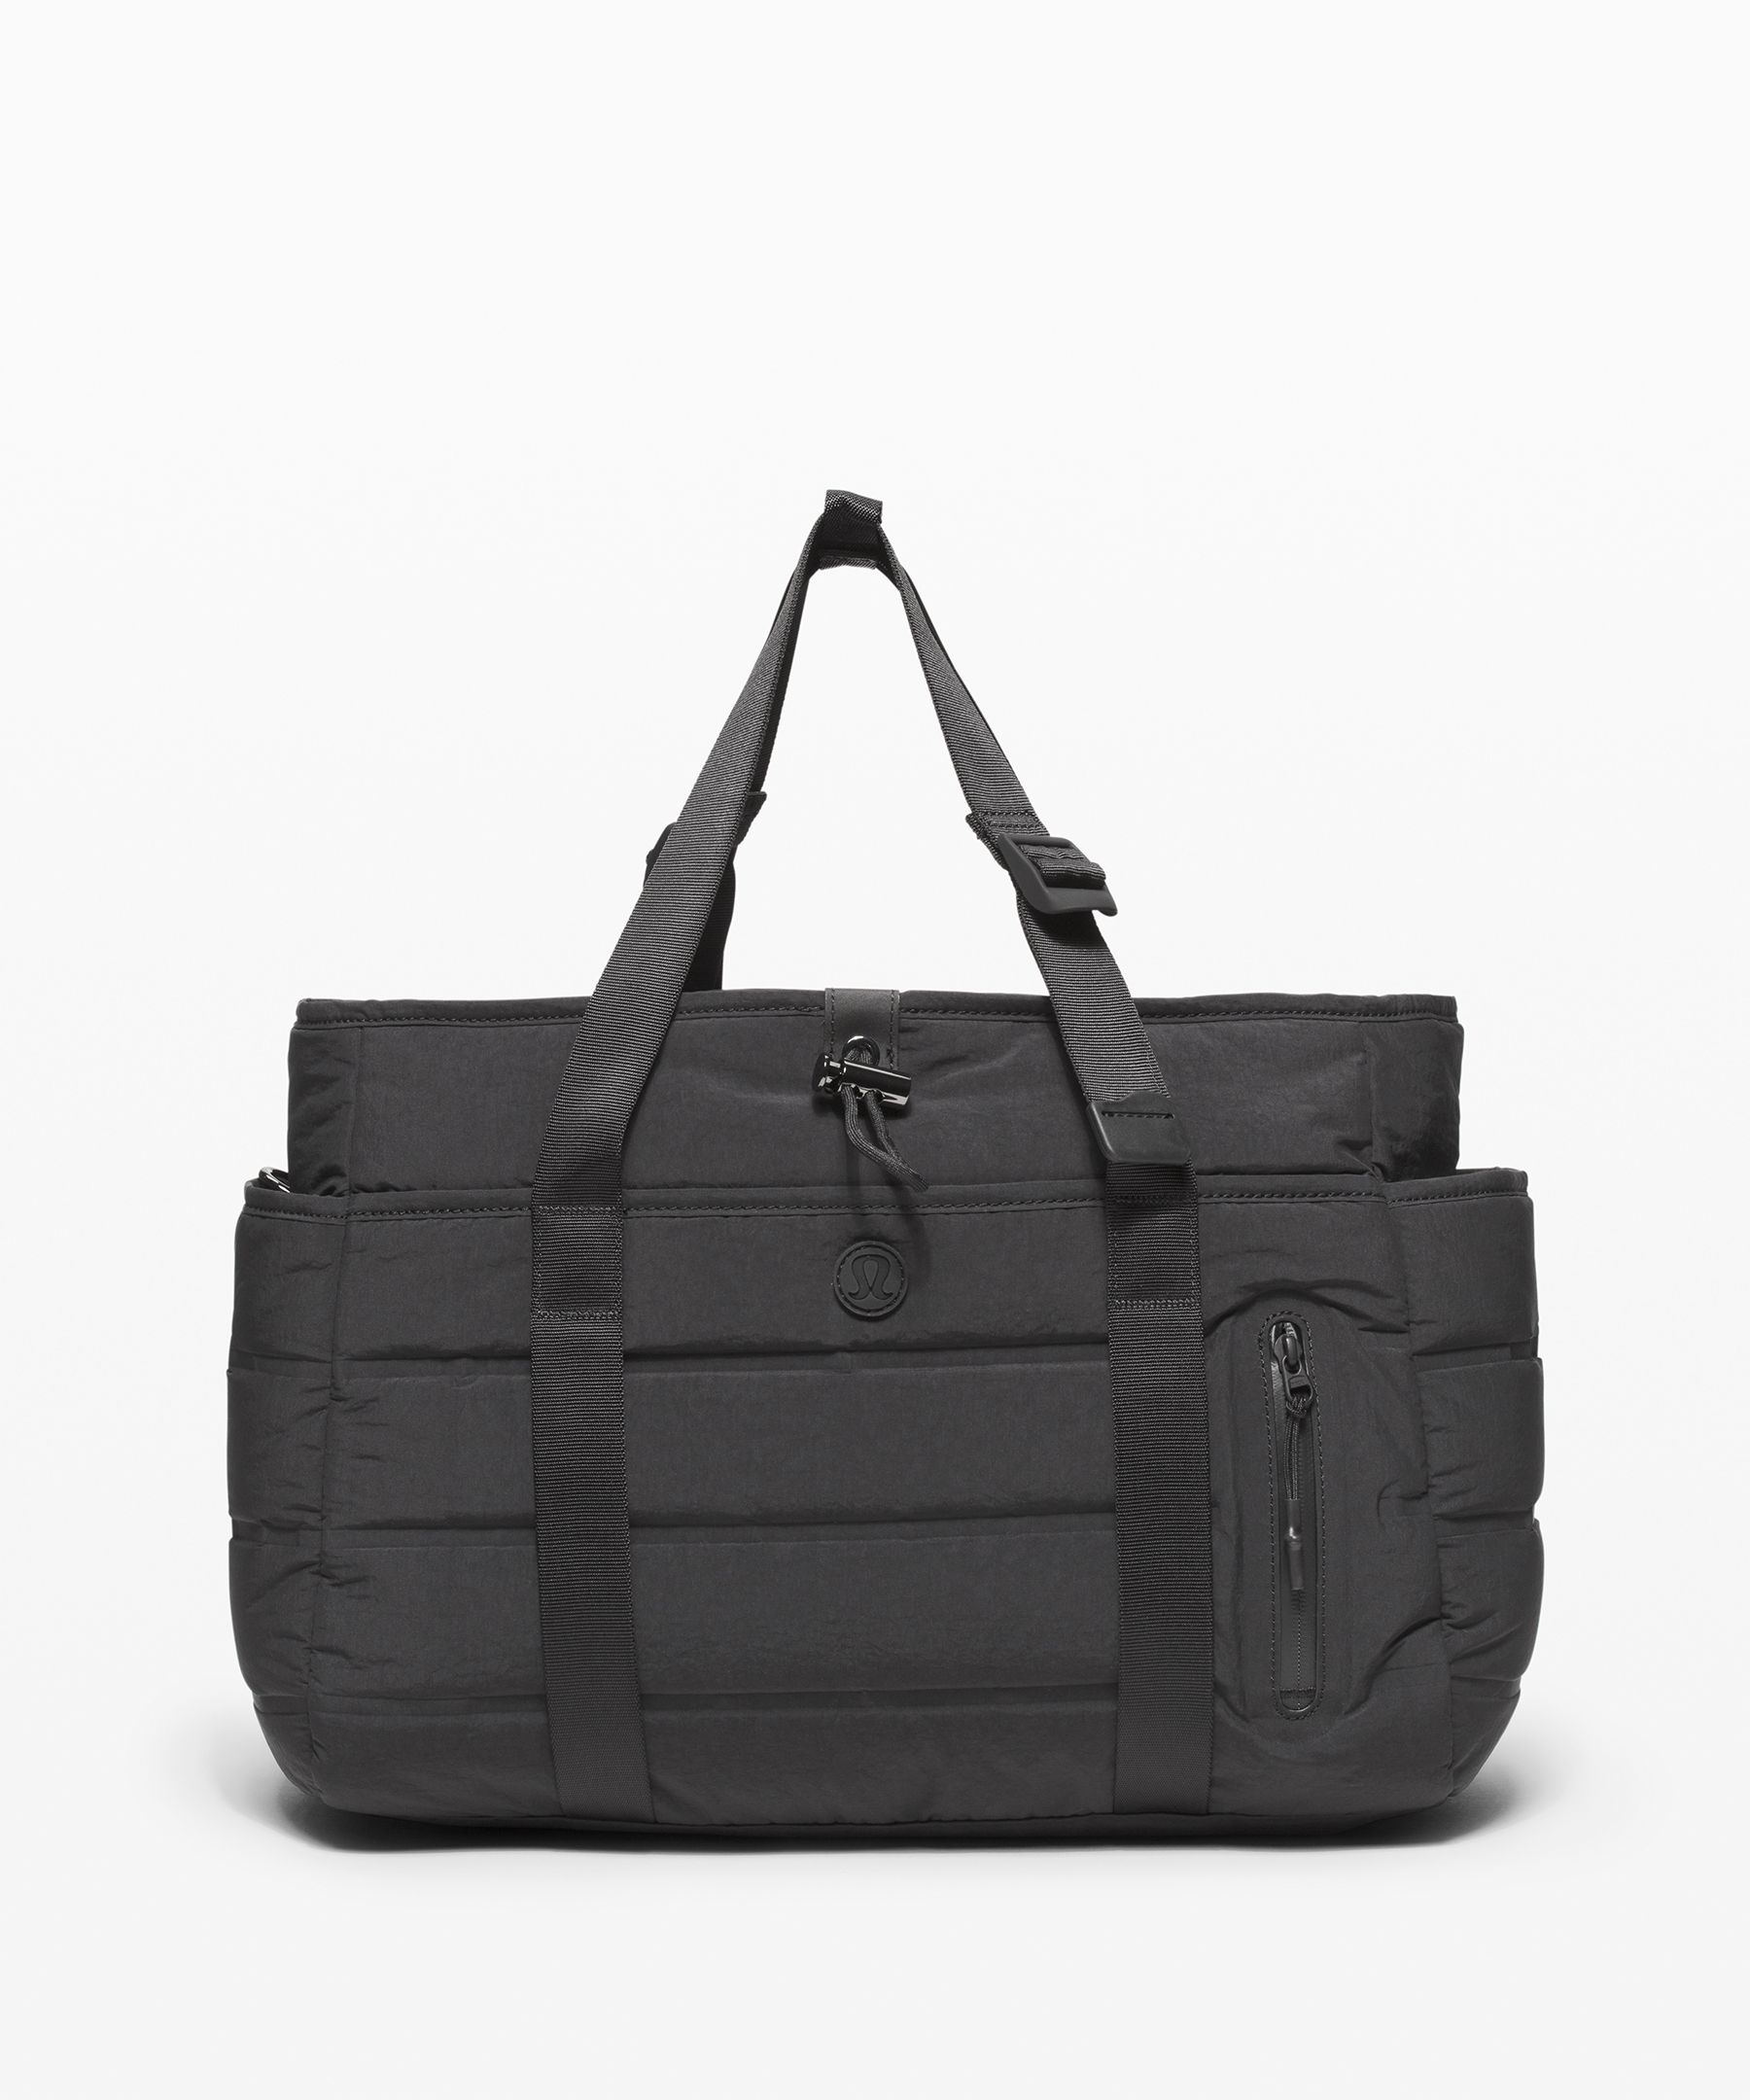 lululemon all day duffel review